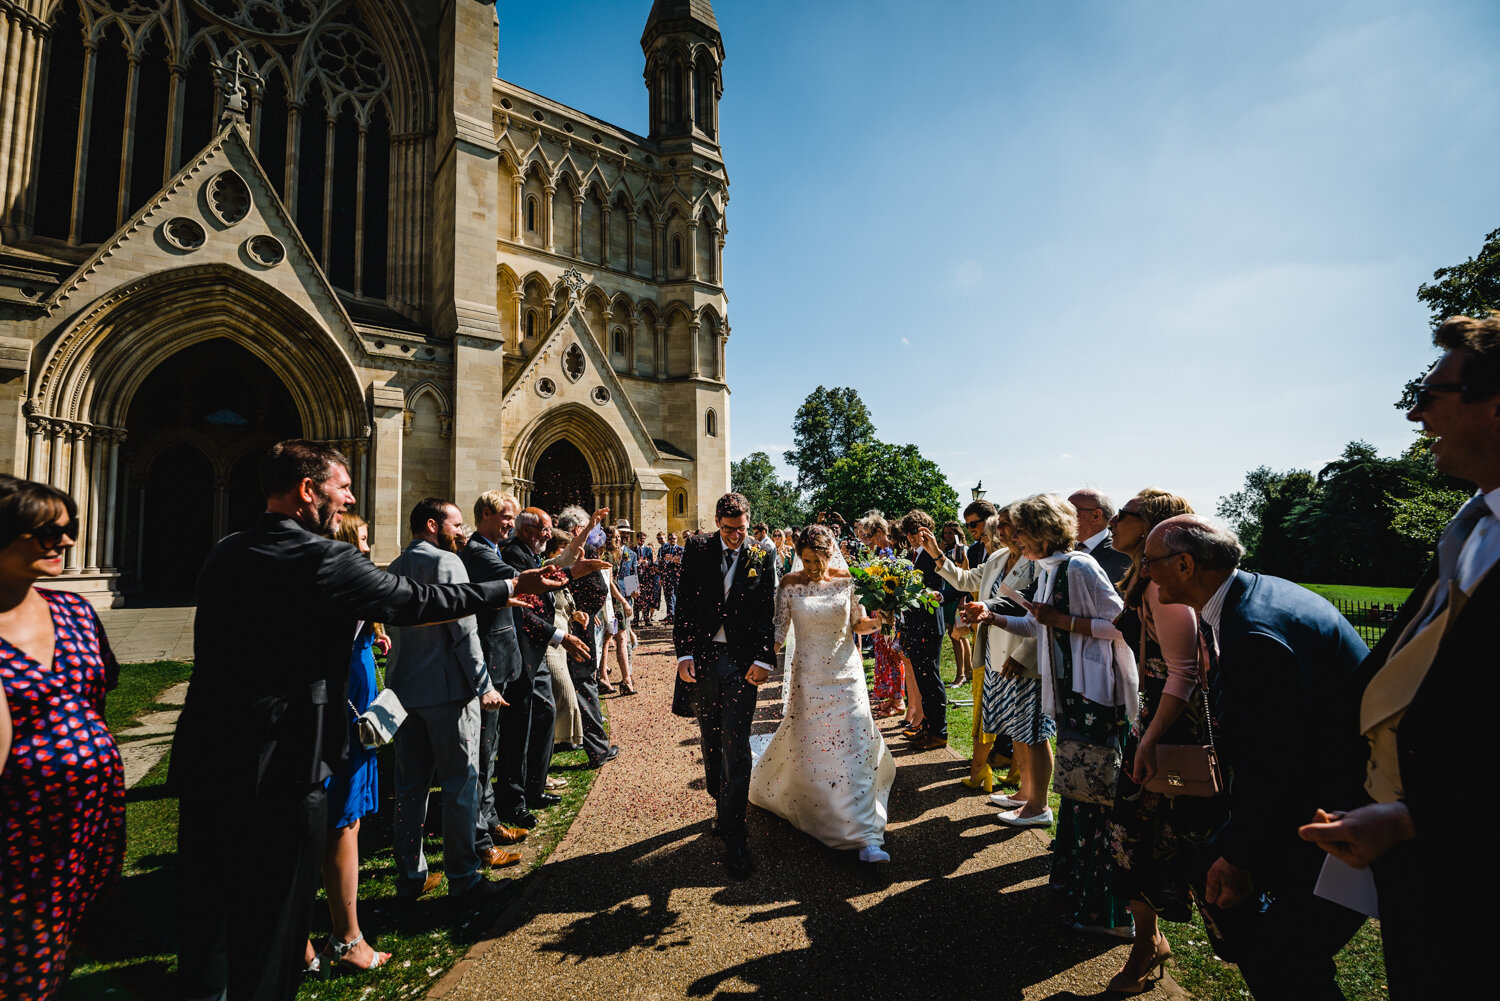 st-albans-cathedral-abbey-wedding-photos-pike-photography-264.jpg